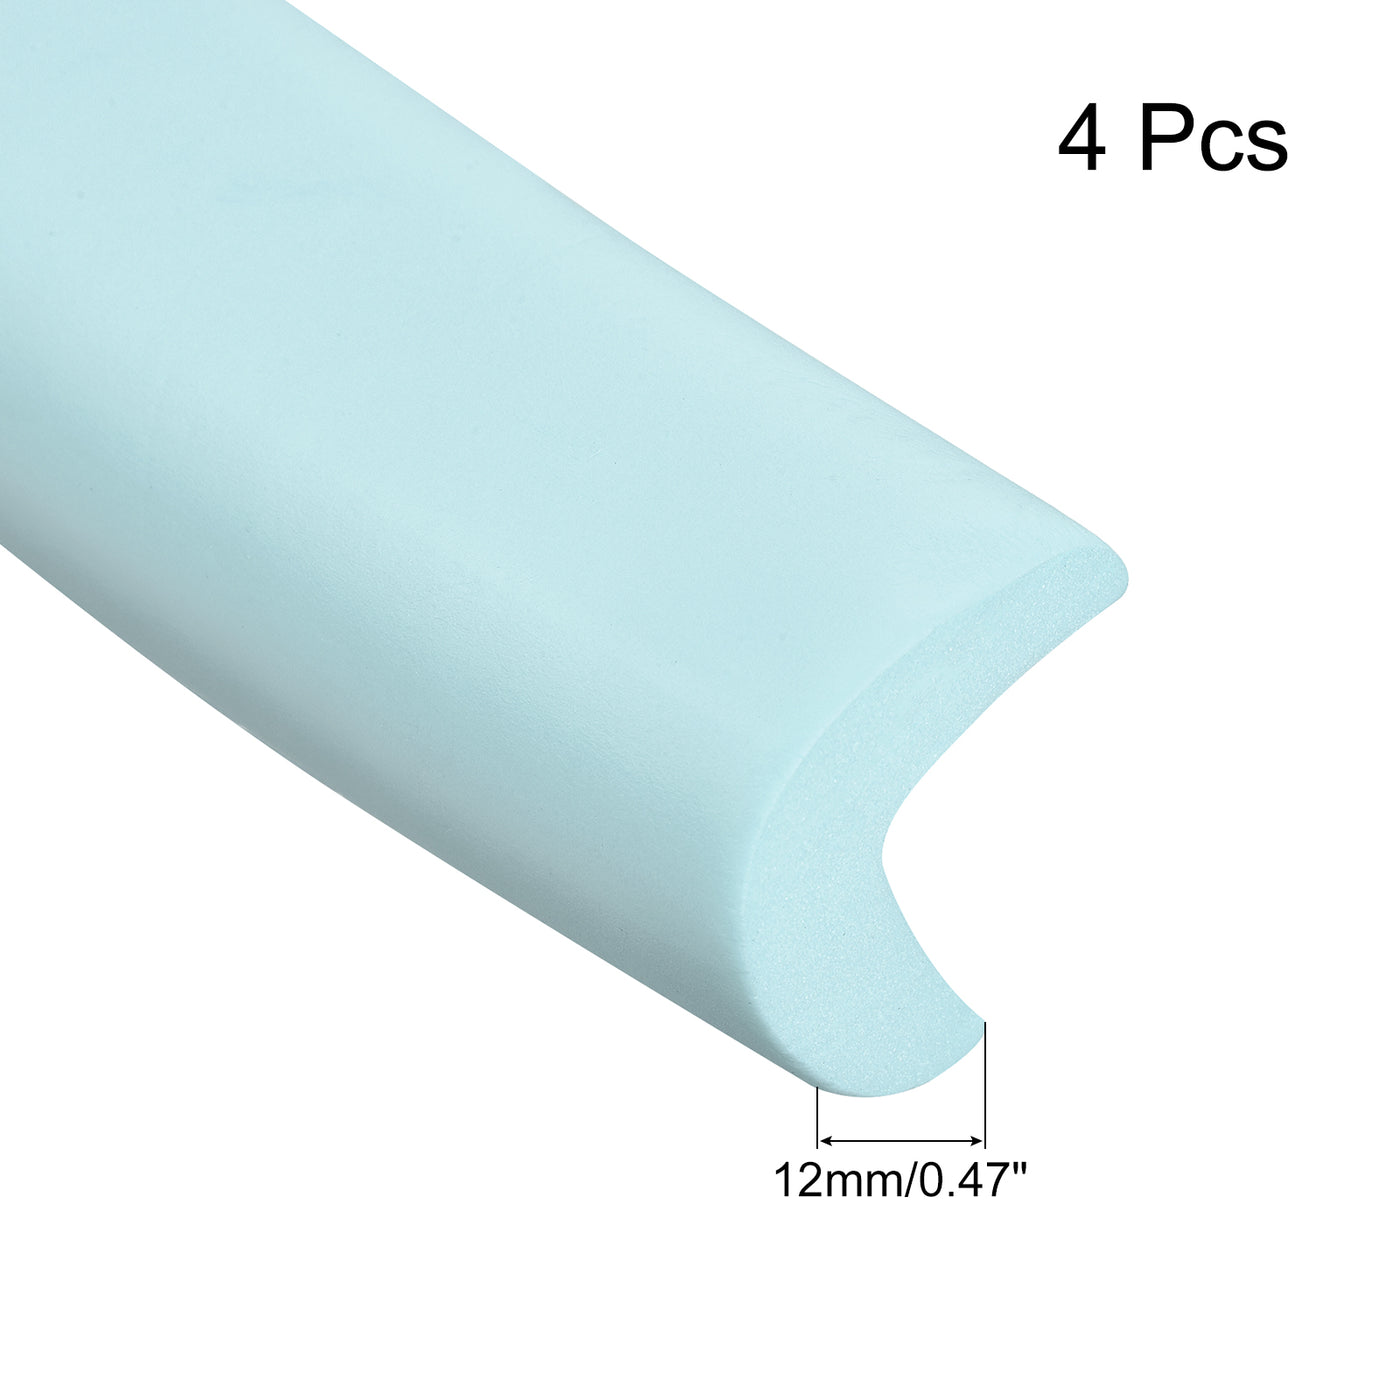 uxcell Uxcell Corner Guards Edge Protectors 6.56ft(2M), 4Pack Foam Safety Bumper Light Blue